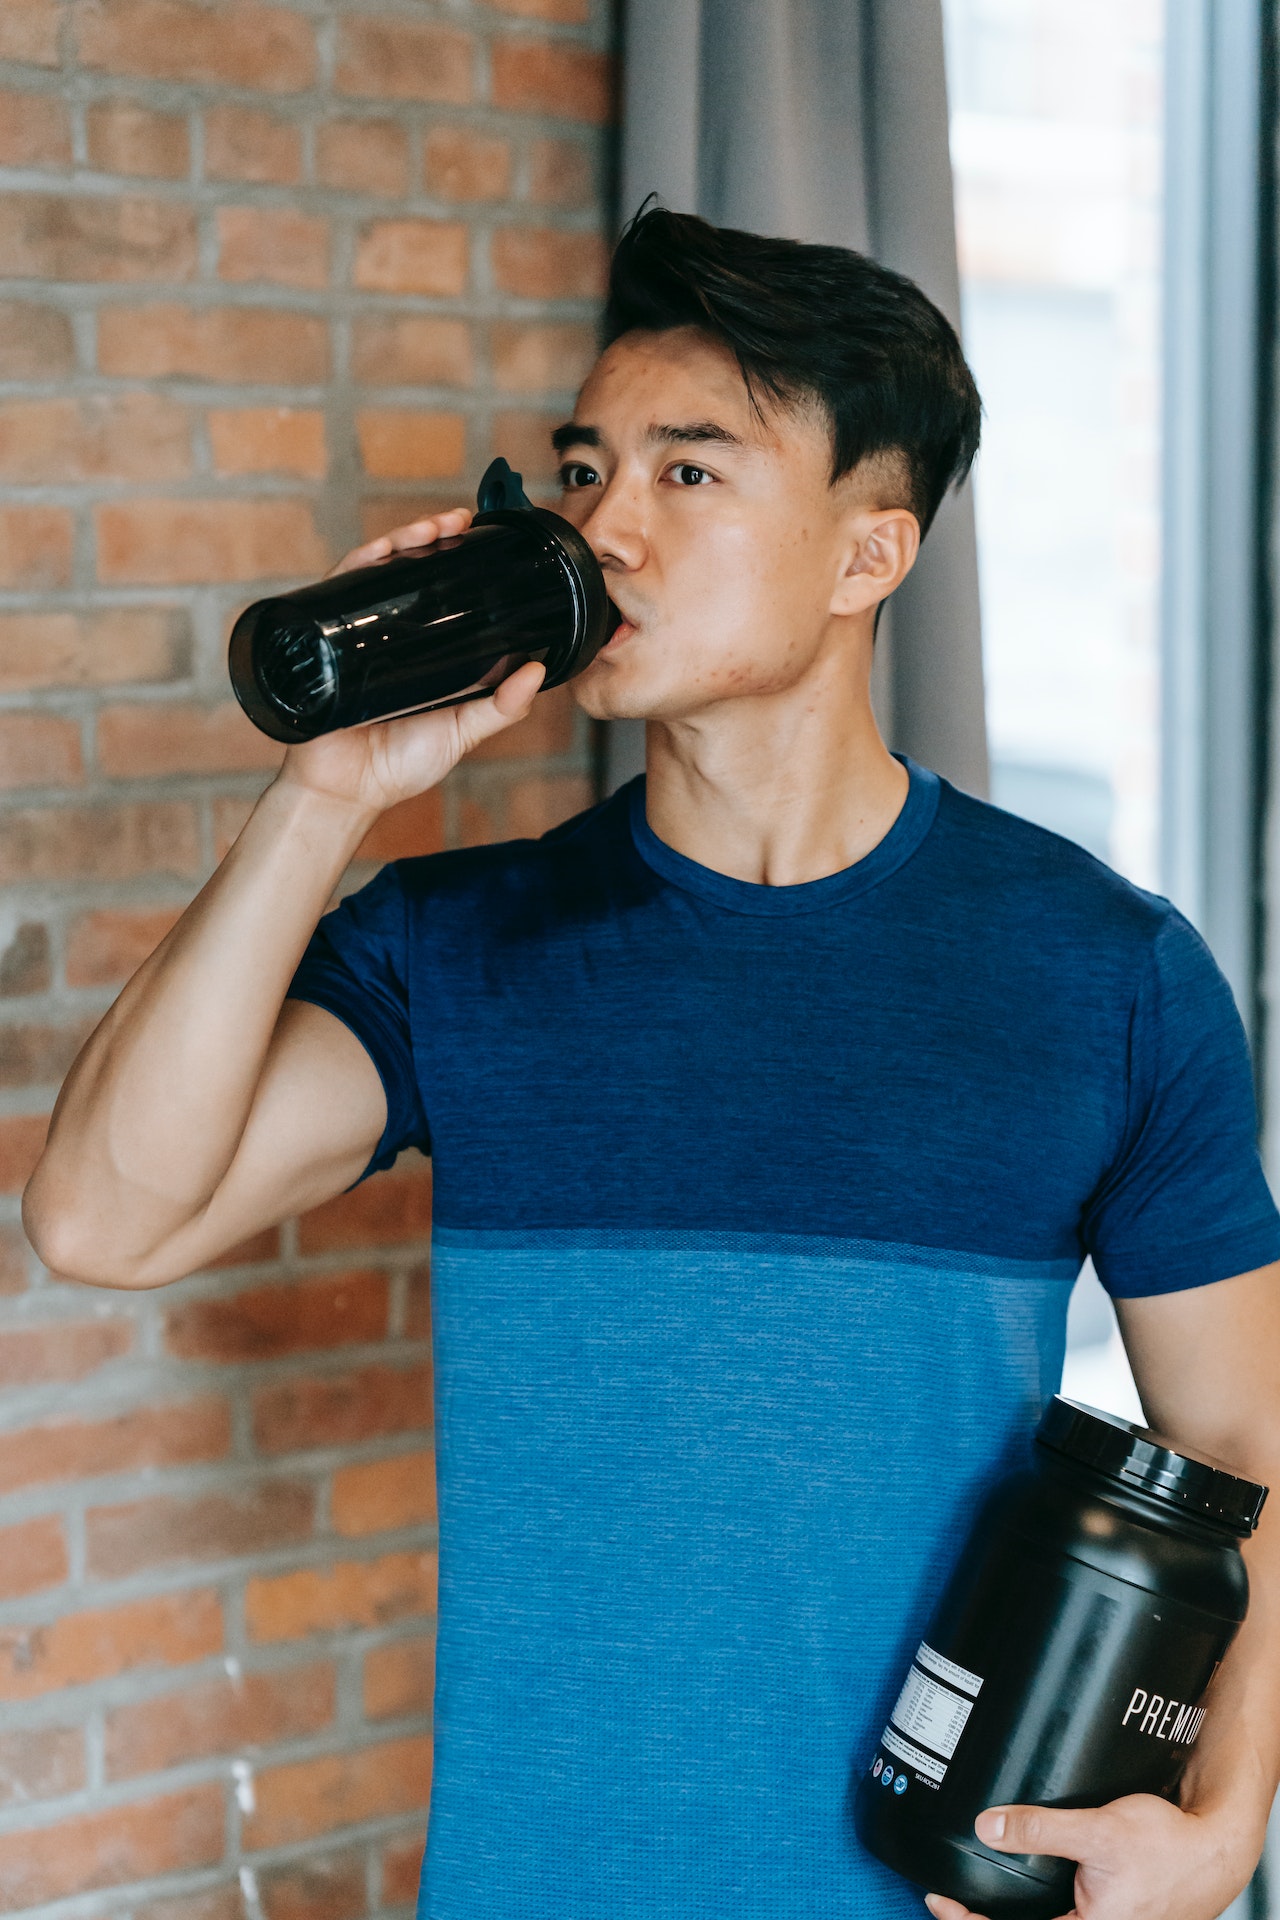 A man wearing a blue shirt is drinking from a black tumbler while holding a black container near a brick wall